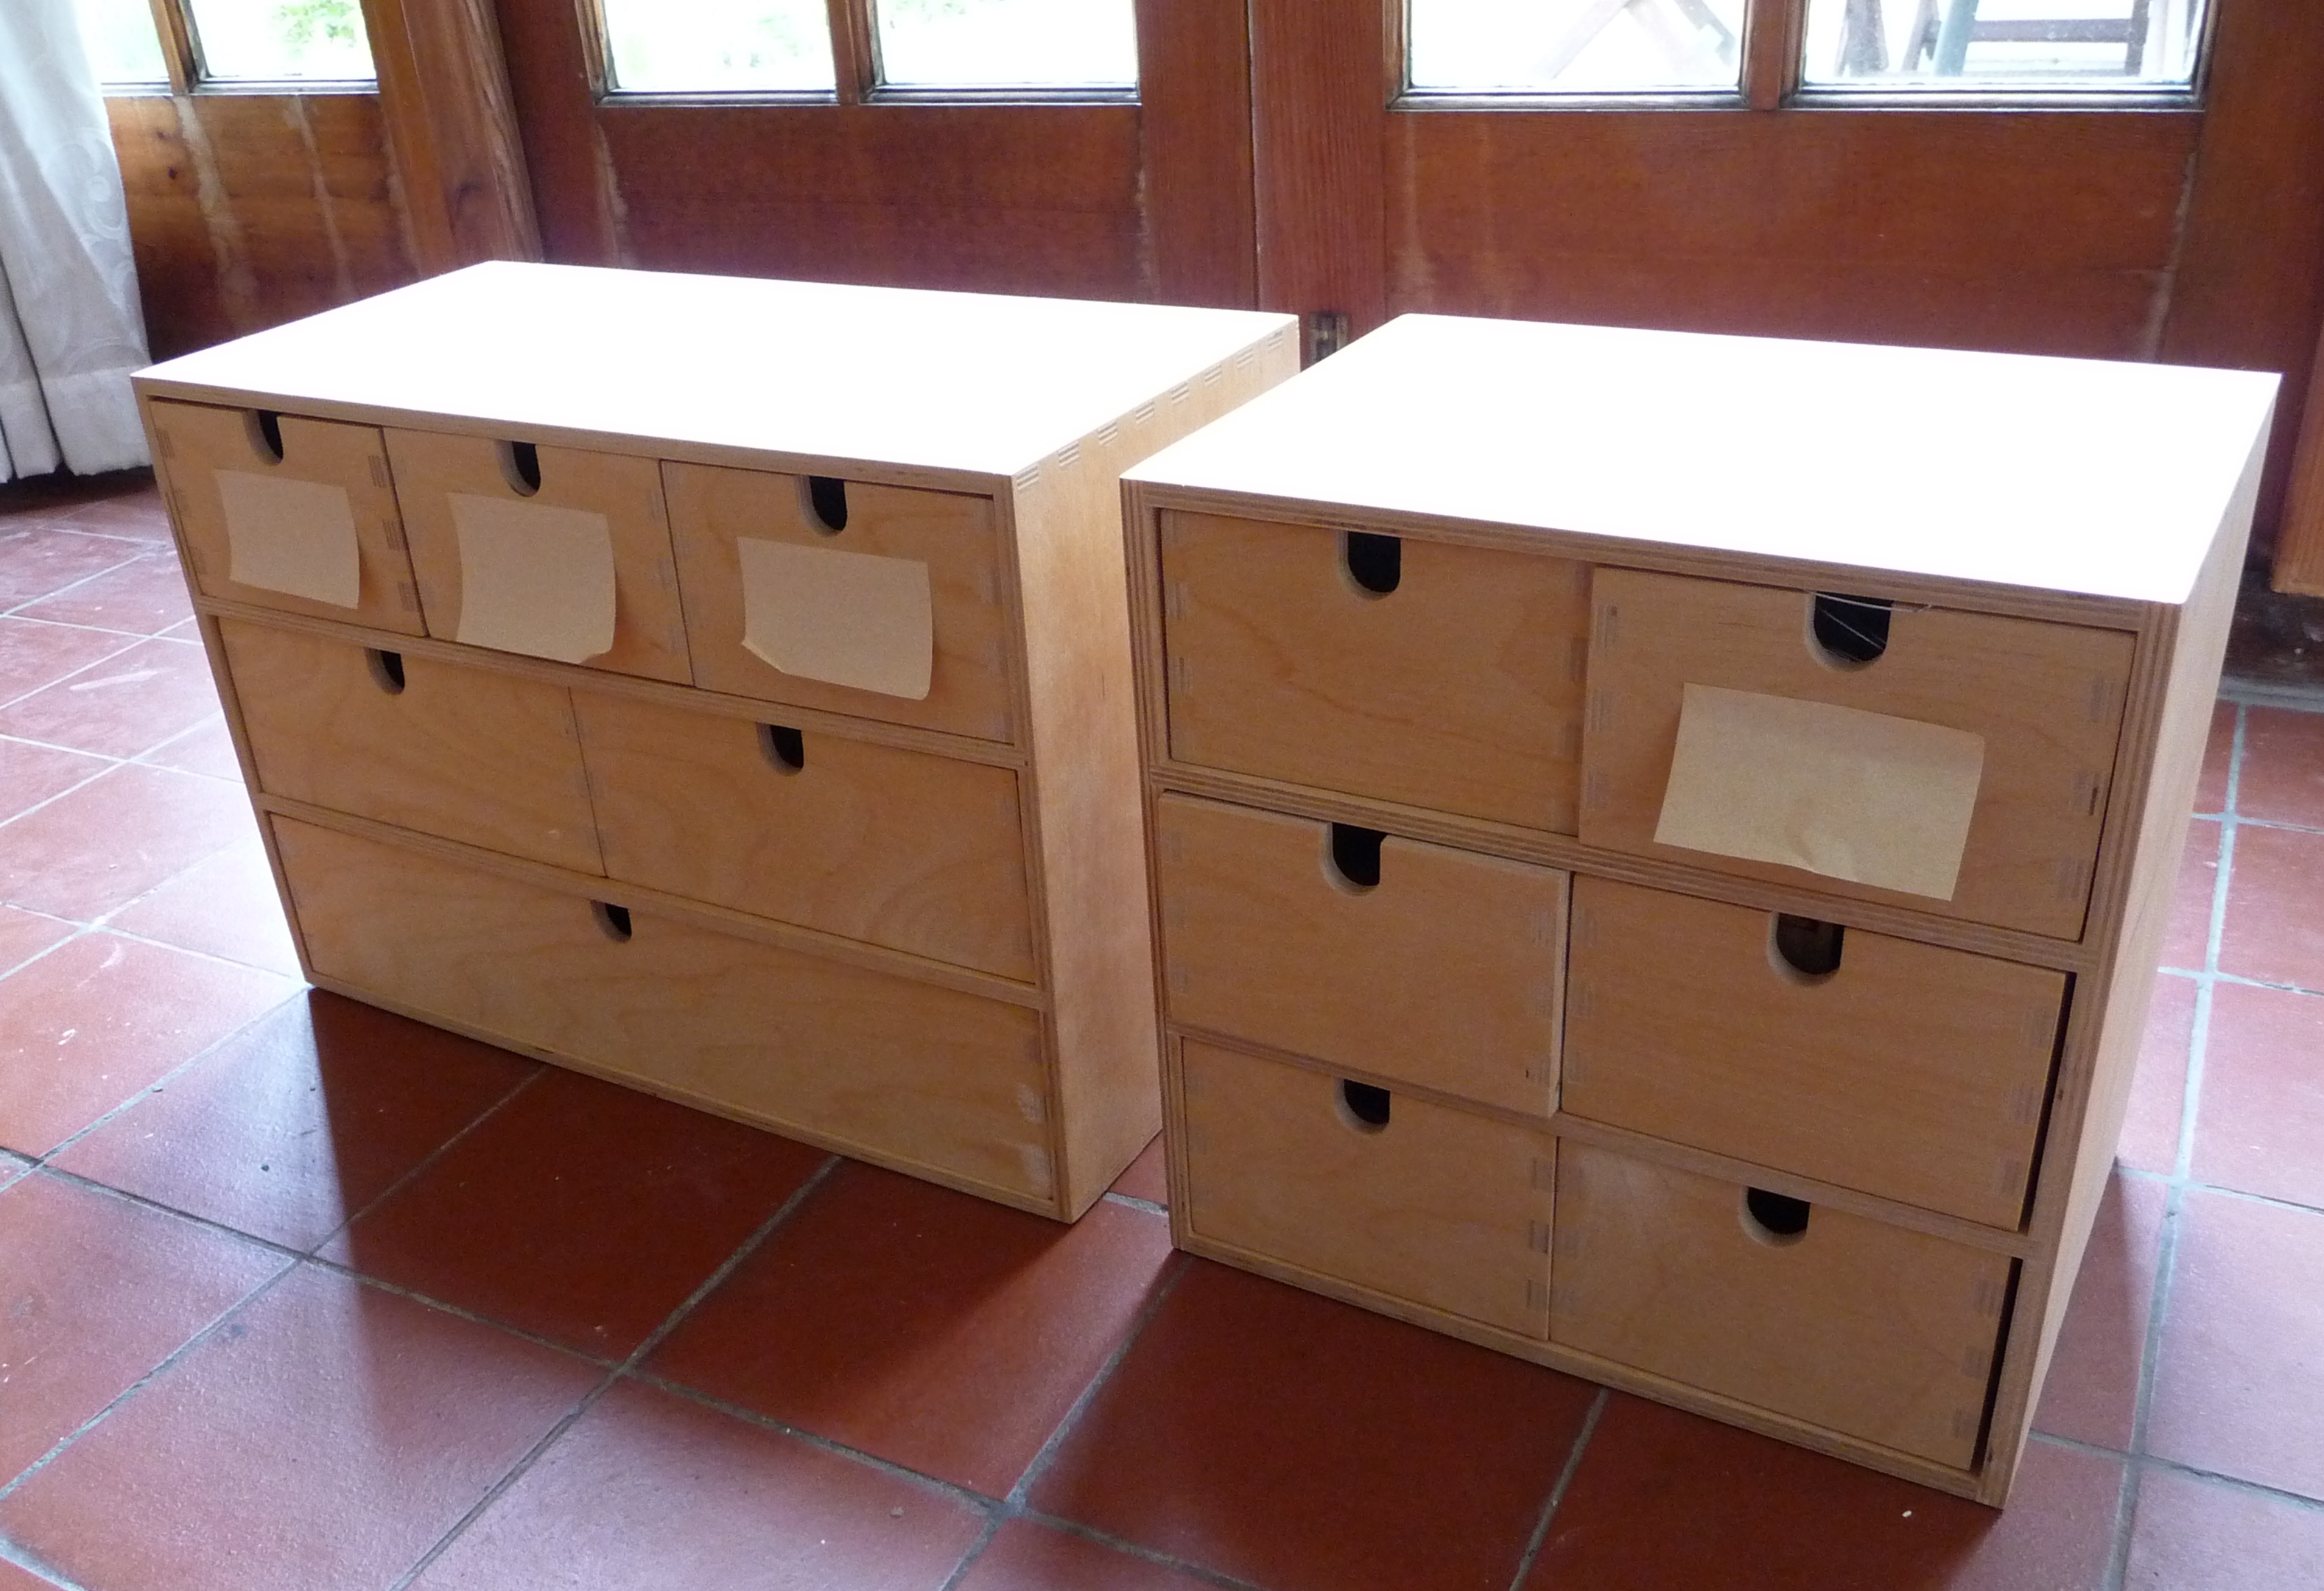 Decoration project – storage boxes | brogues with socks ...